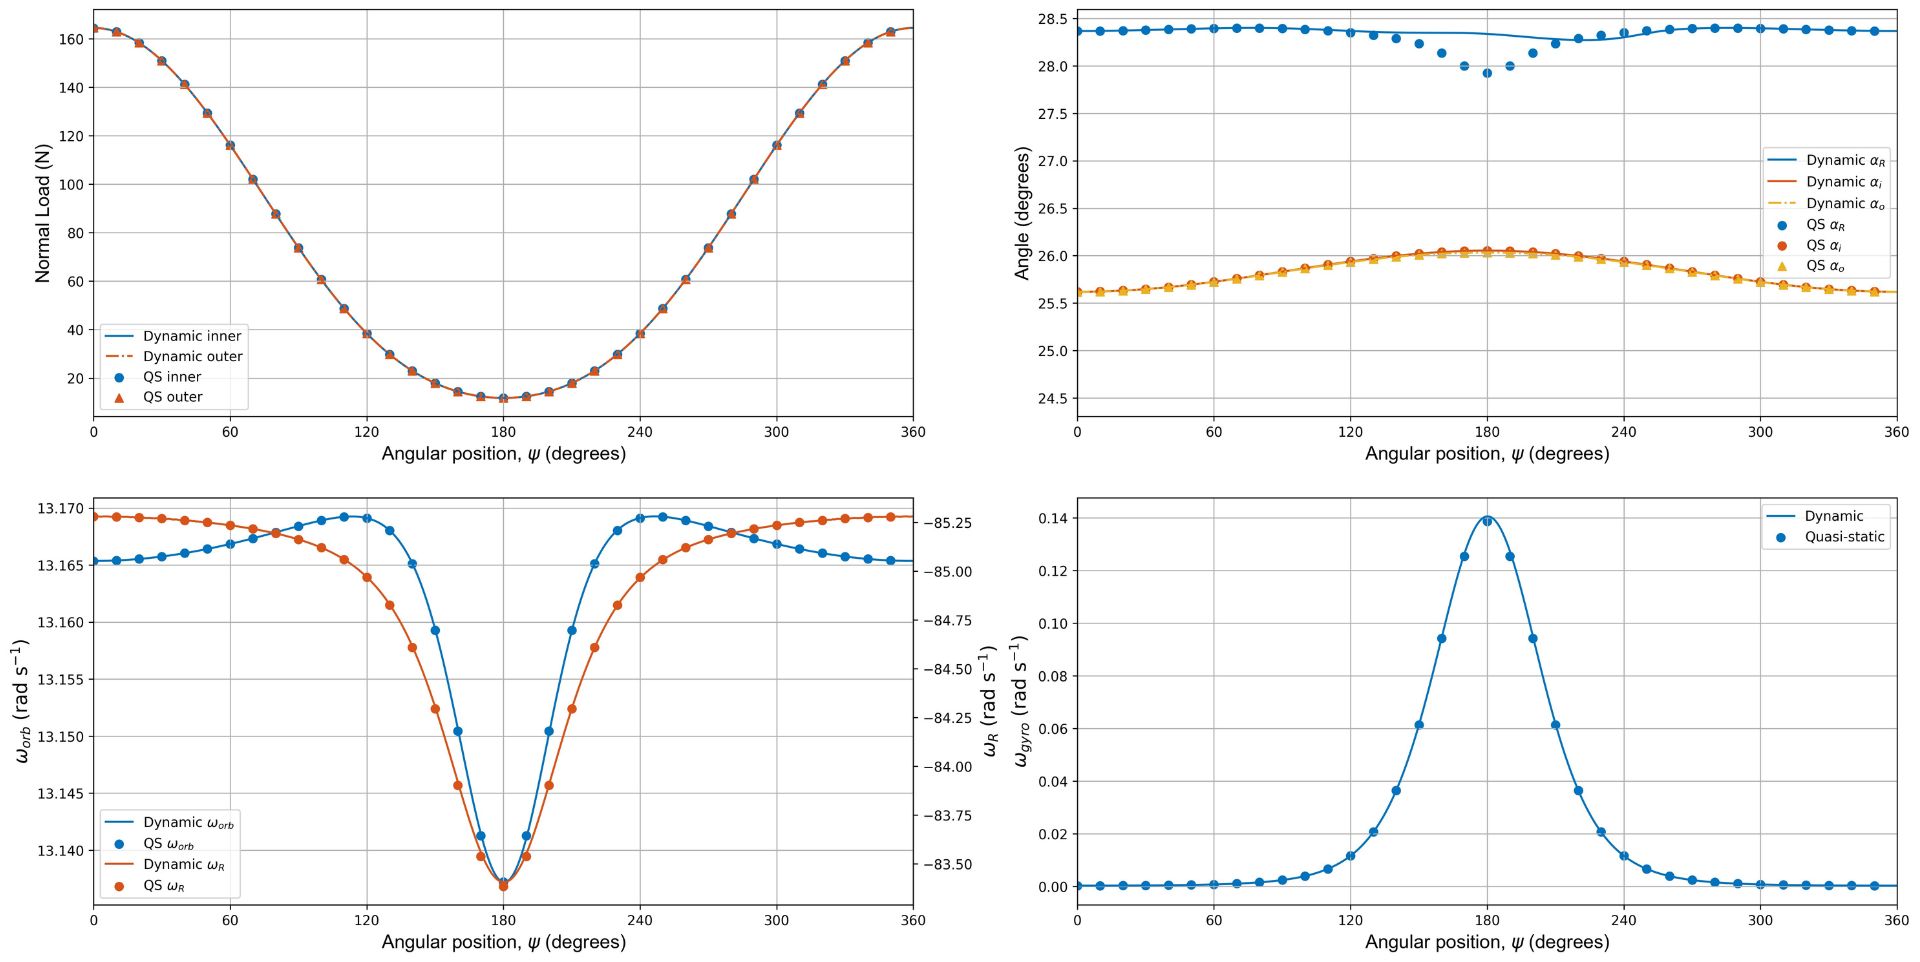 Comparison between the quasi-static and dynamic models for an angular contact ball bearing operating at low speed (ω_i=300 RPM) under combined axial-radial load.